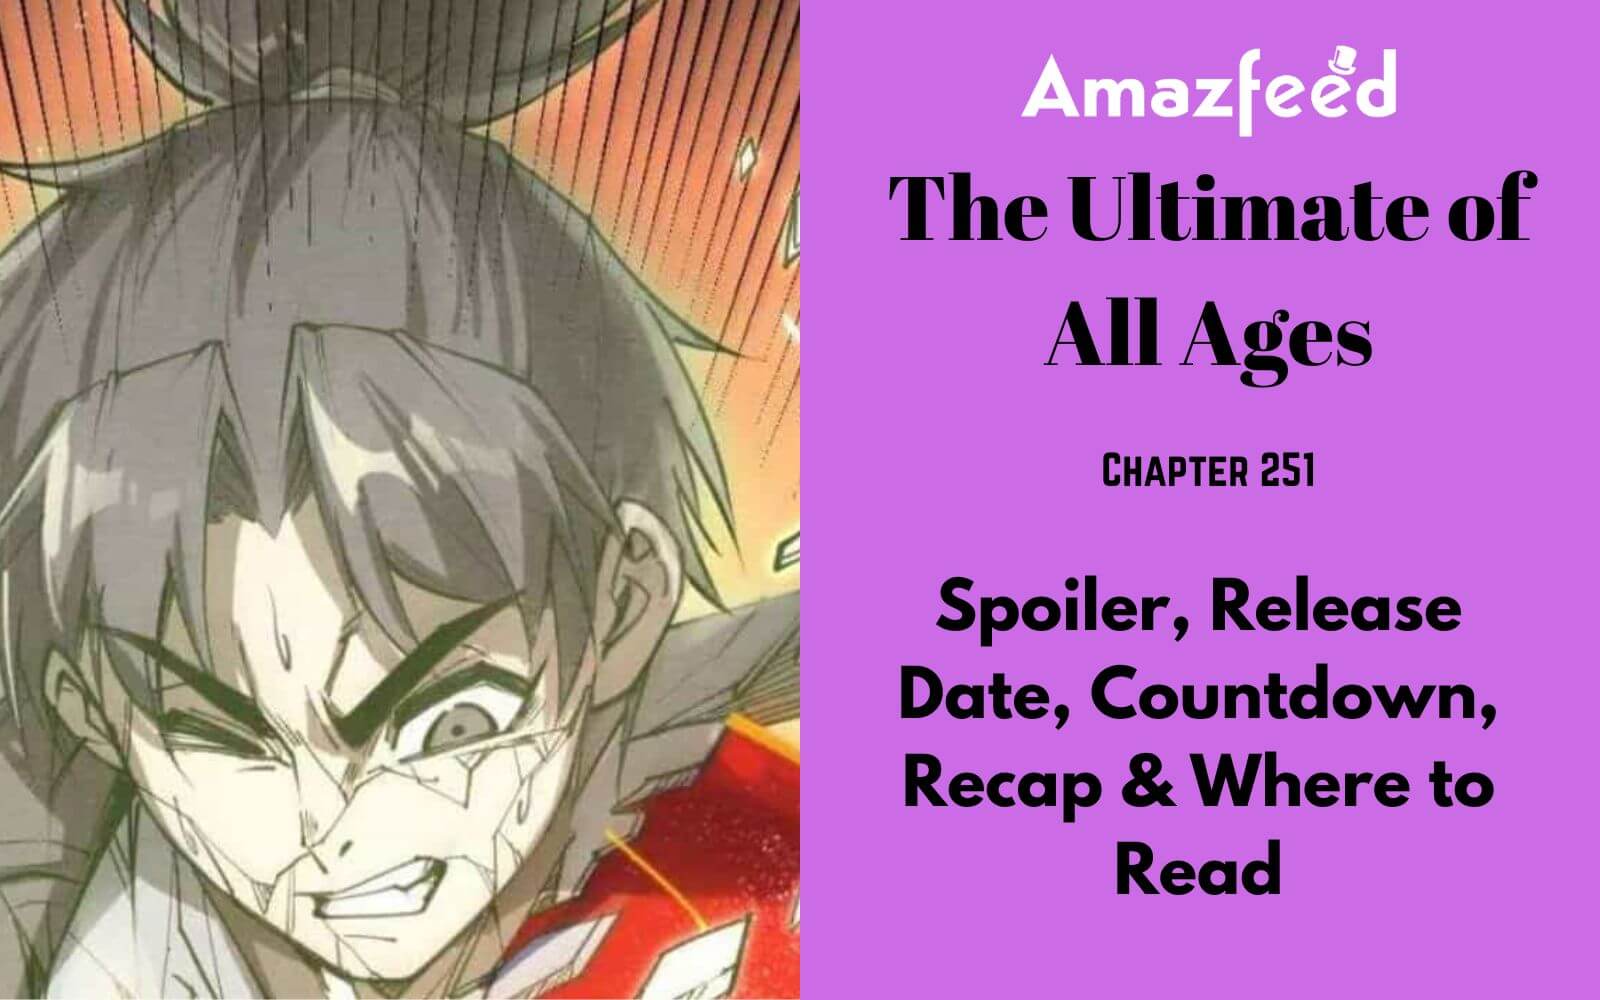 Dragon-Devouring Mage Chapter 35 Spoiler, Release Date, Recap & Where to  Read » Amazfeed